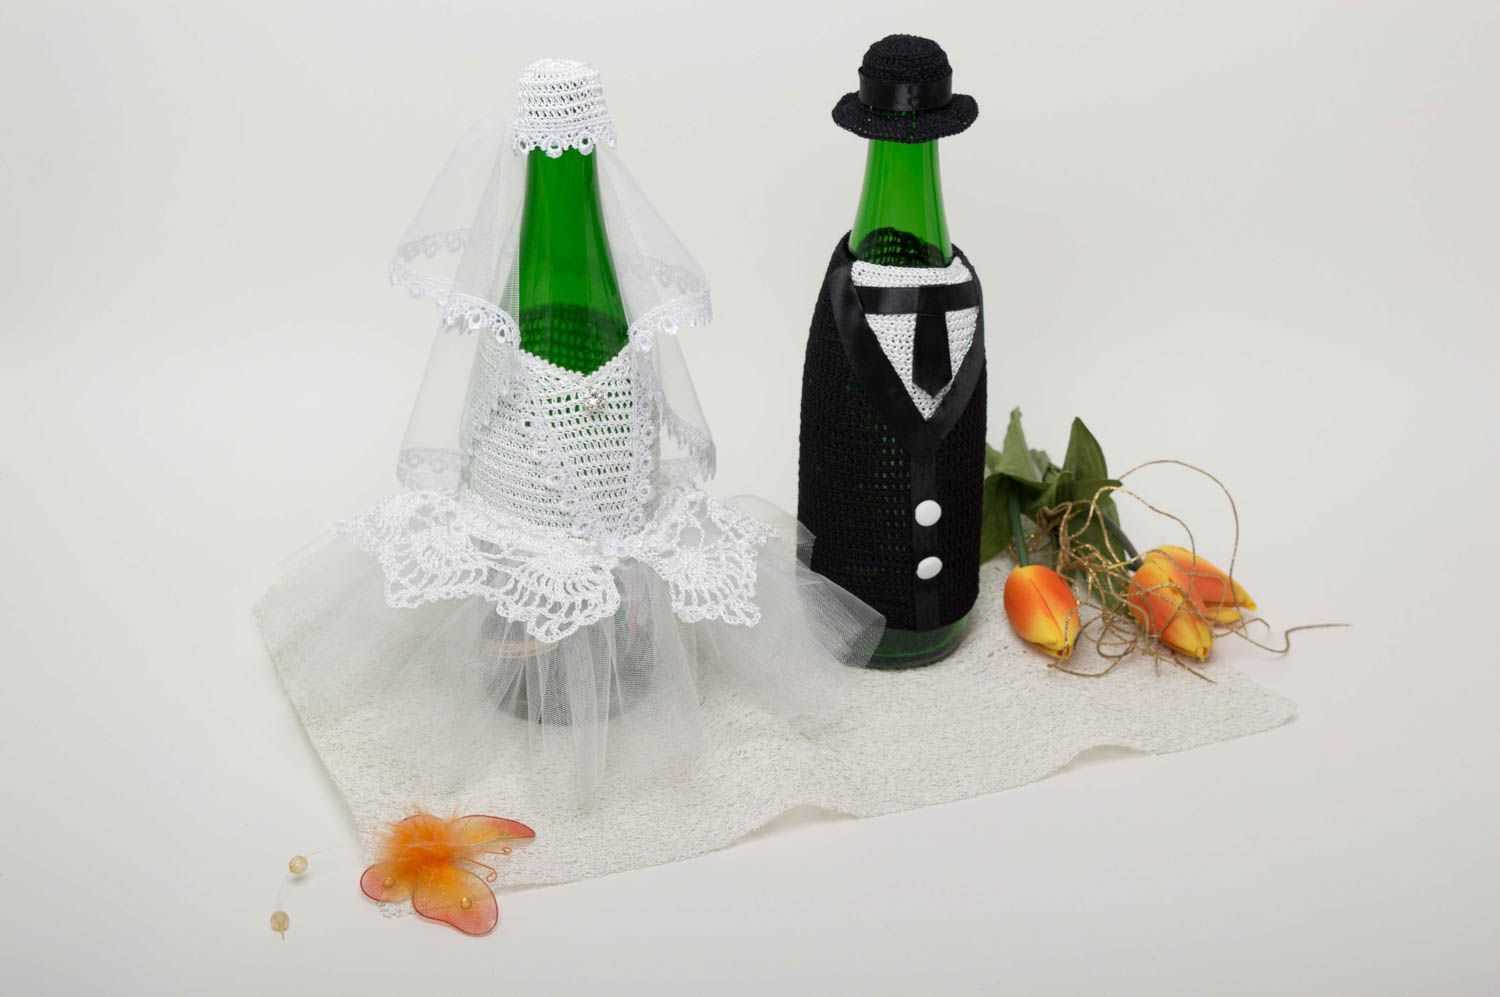 Handmade champagne bottle covers wedding bottle covers bottle cozy 2 pieces photo 1